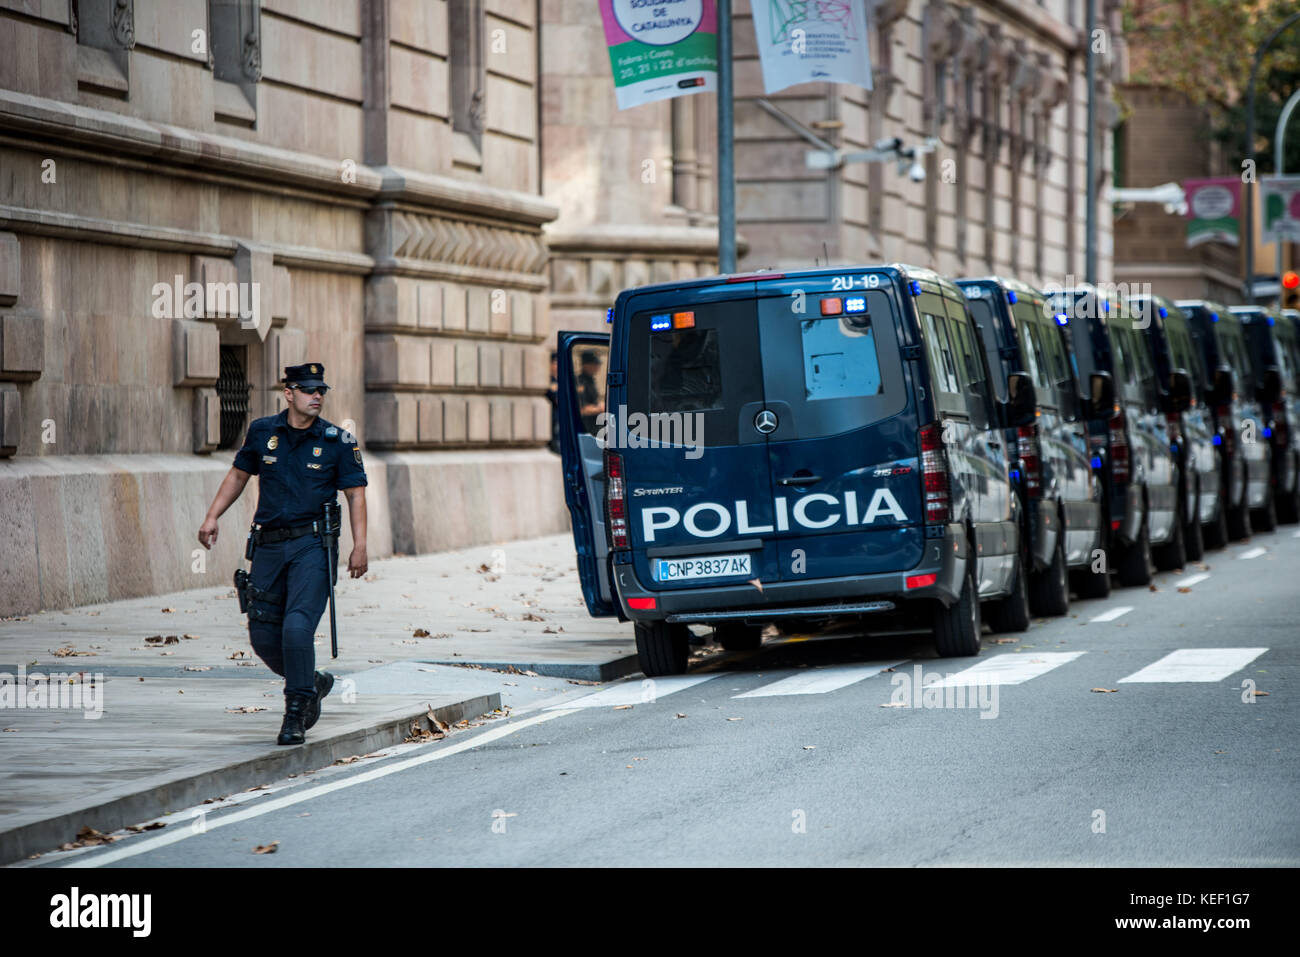 Barcelona, Catalonia, Spain. 9th Oct, 2017. Spanish police took control of the security of the building of the Superior Justice Court of Catalonia, until now in the hands of the Mossos d'squadra, the Catalan autonomous police. Barcelona lives a tense calm waiting for the possible unilateral declaration of independence for tomorrow. Credit: Brais G. Rouco/SOPA/ZUMA Wire/Alamy Live News Stock Photo